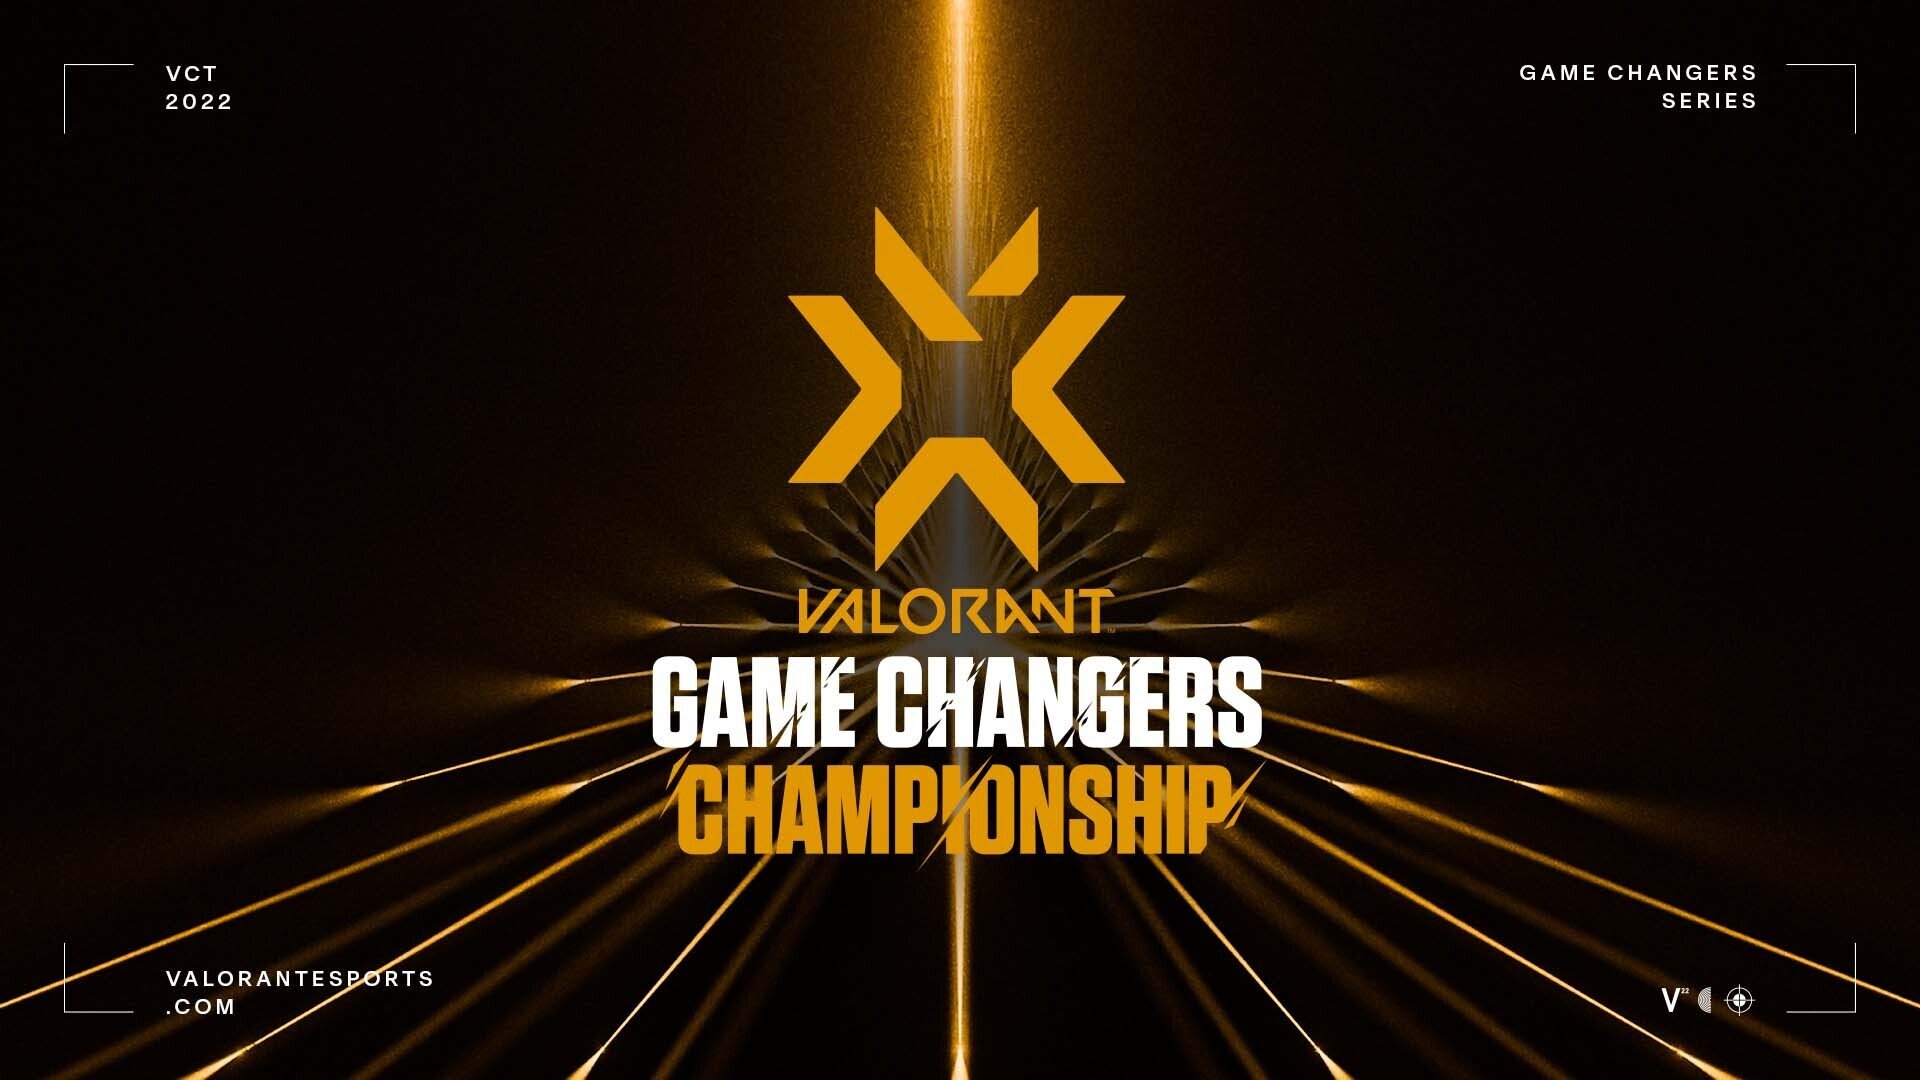 VCT-Game-Changers-Championship-logo